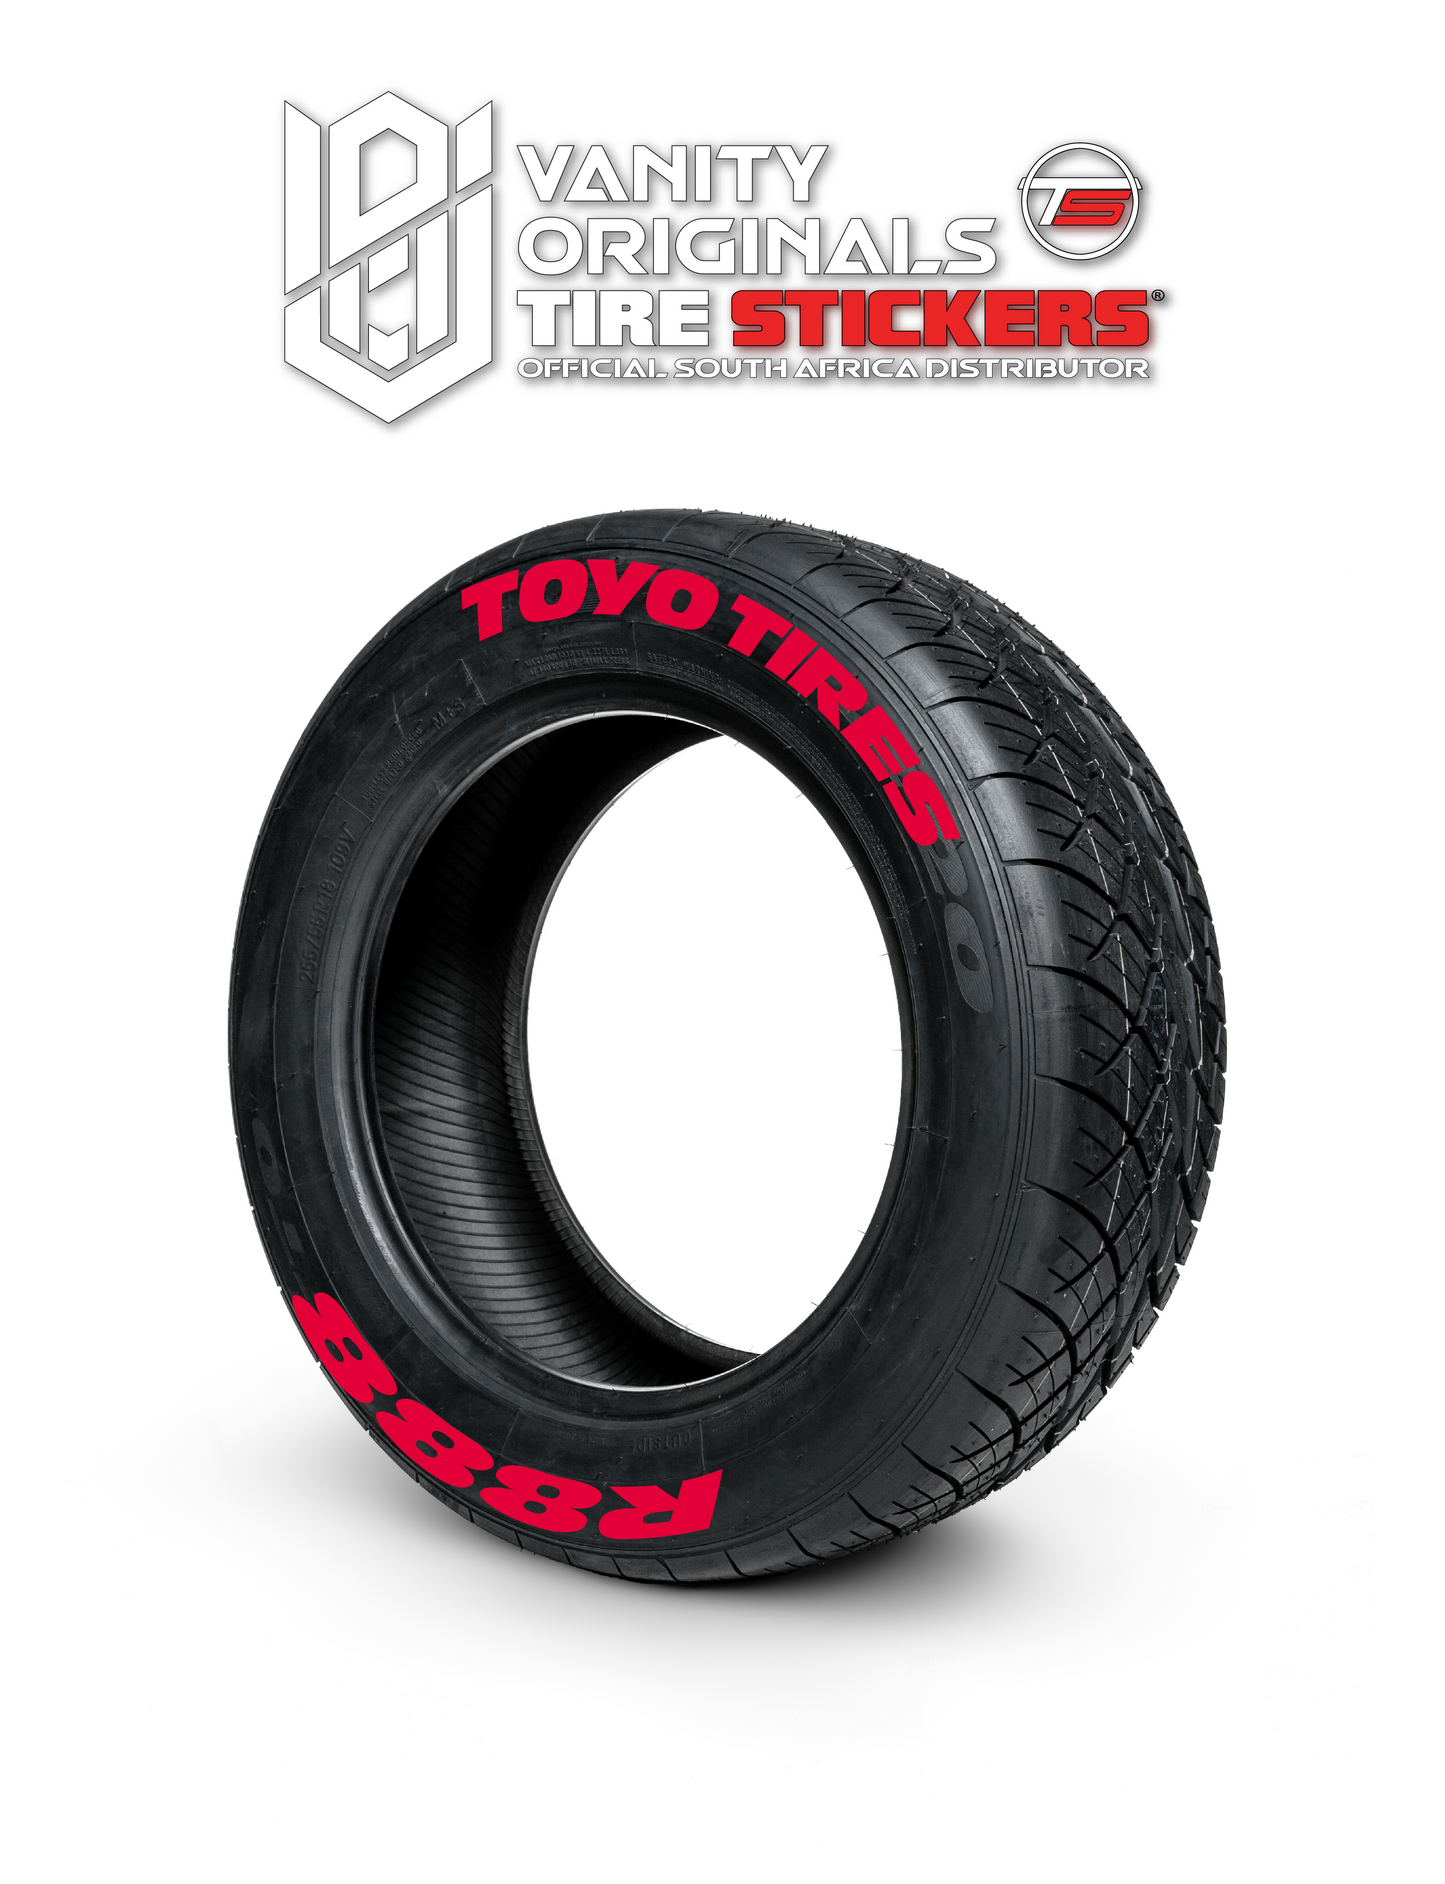 Toyo Tires R888 ( 8x Rubber Decals, Adhesive & Instructions Included )